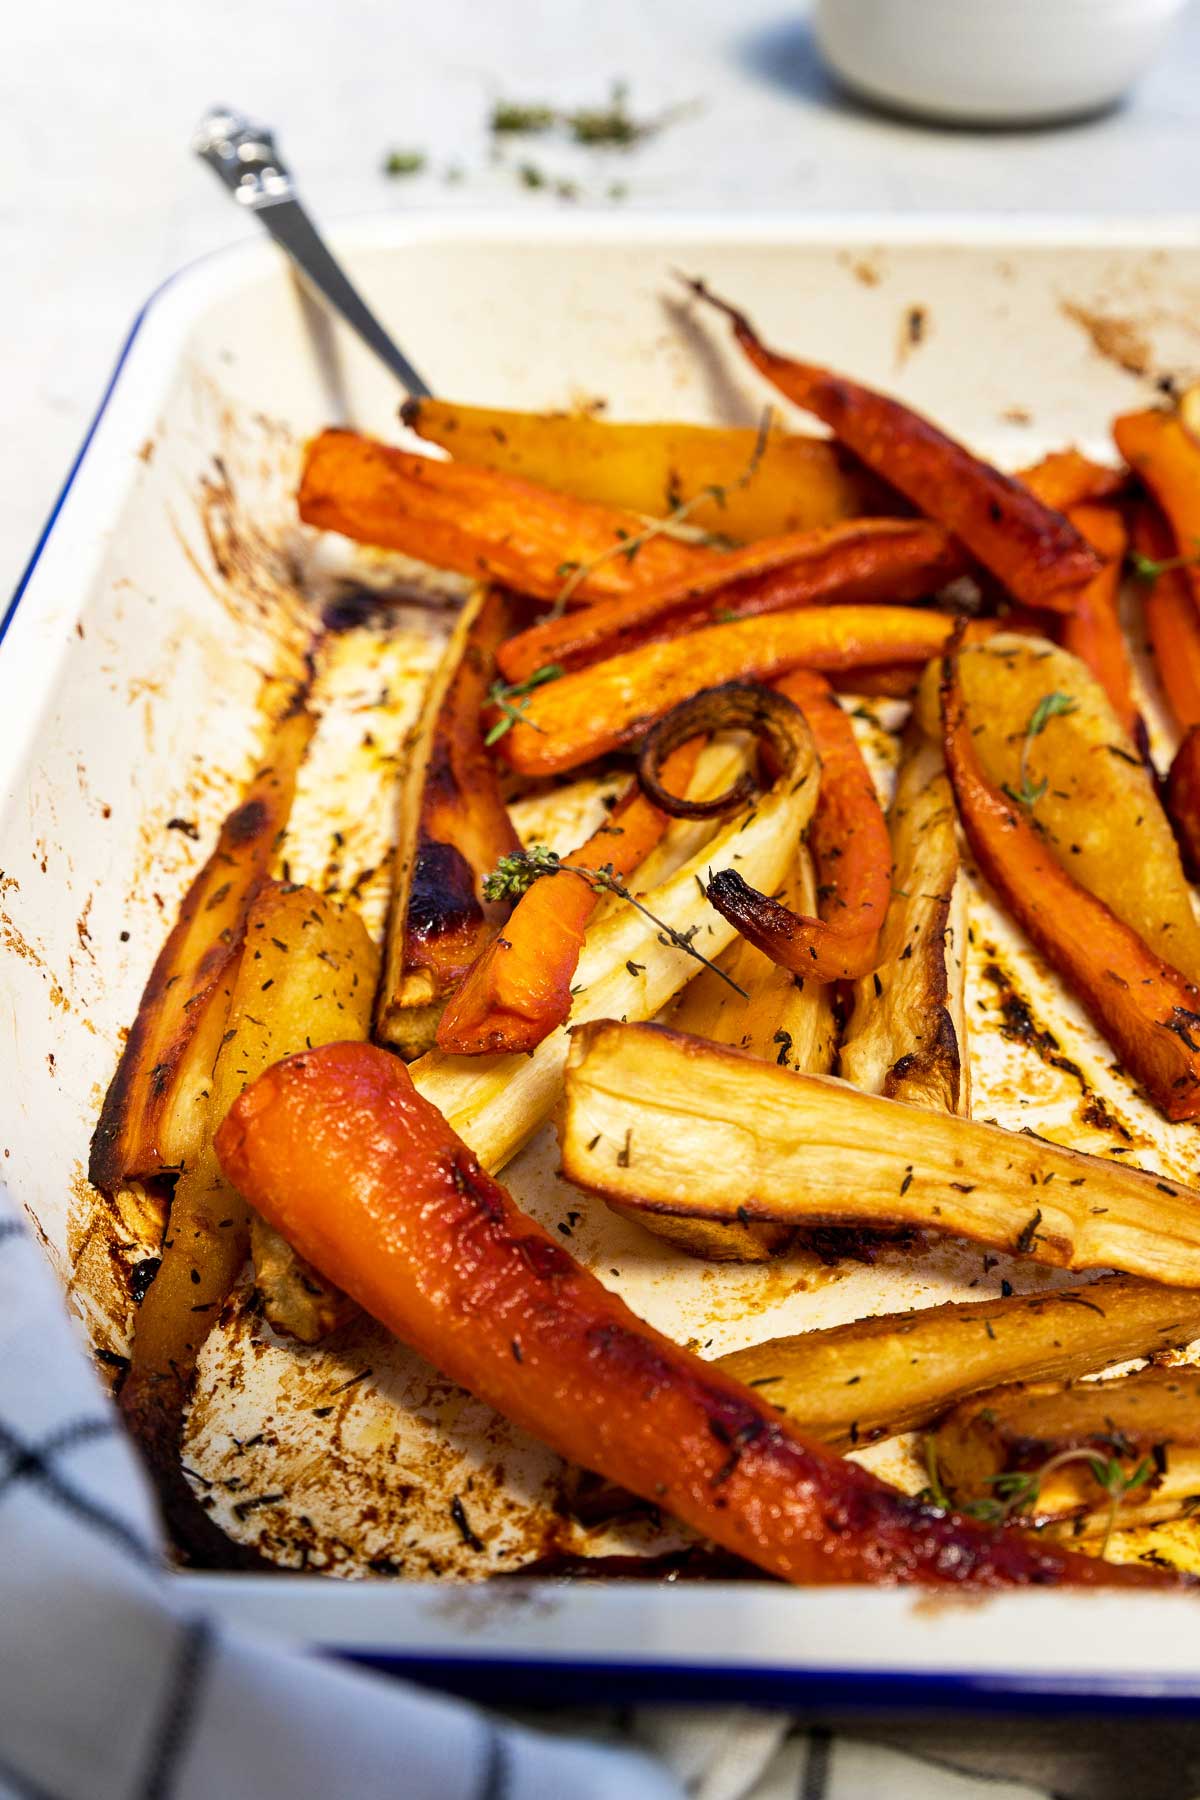 Closeup view of honey roasted carrots and parsnips in a white baking dish with a blue rim sprinkled with fresh thyme and with a blue and white checked tea towel in the foreground.